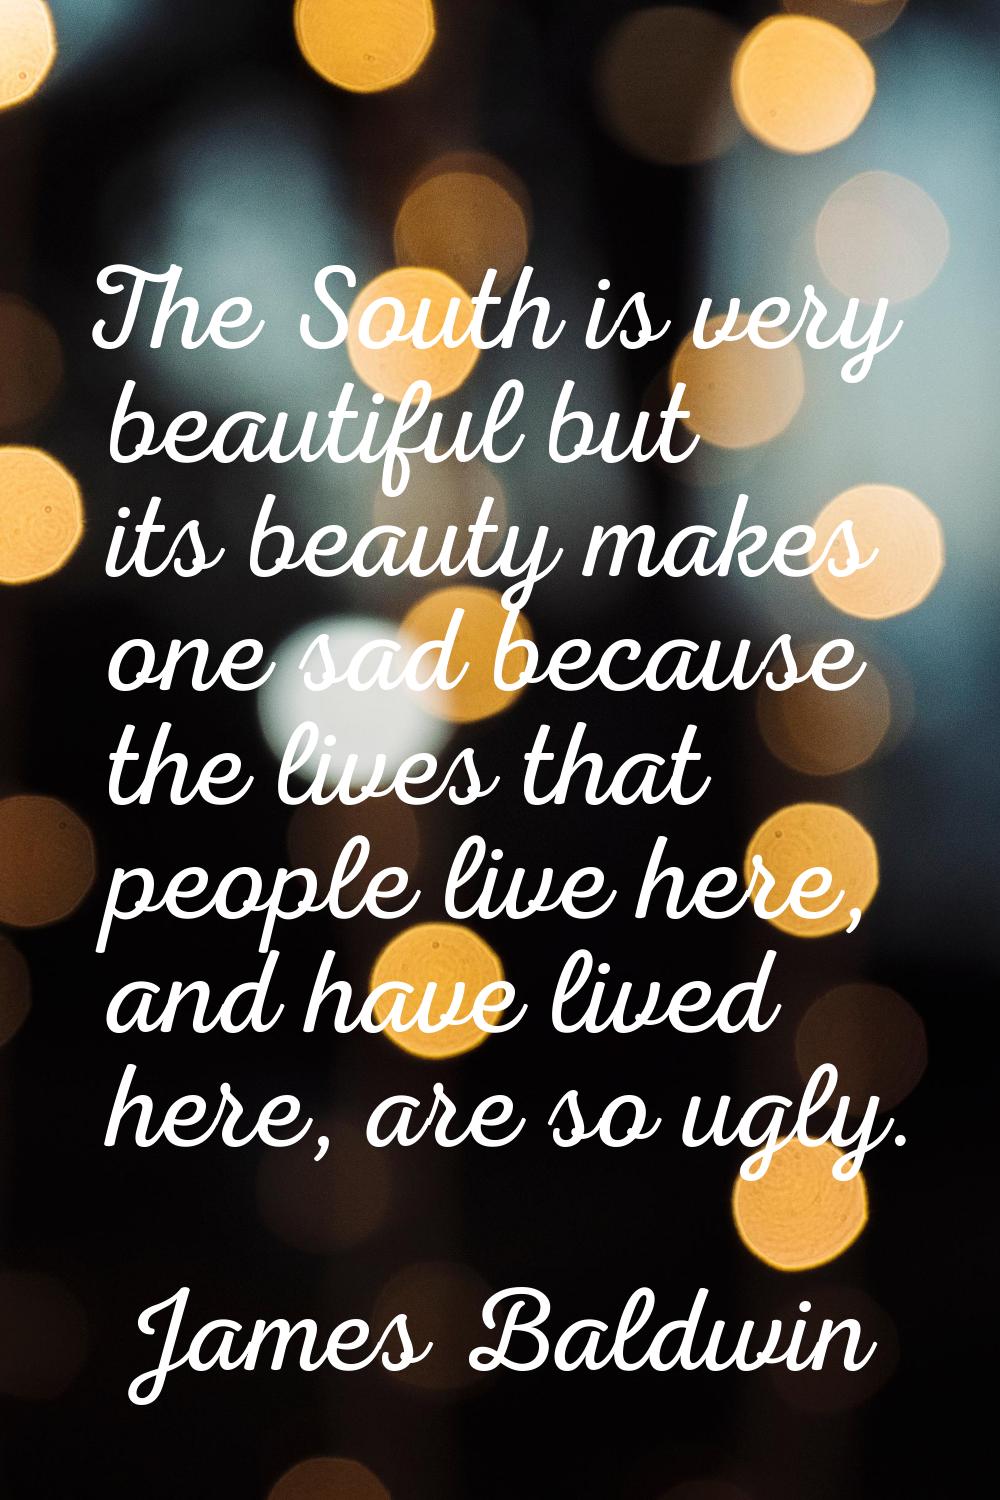 The South is very beautiful but its beauty makes one sad because the lives that people live here, a